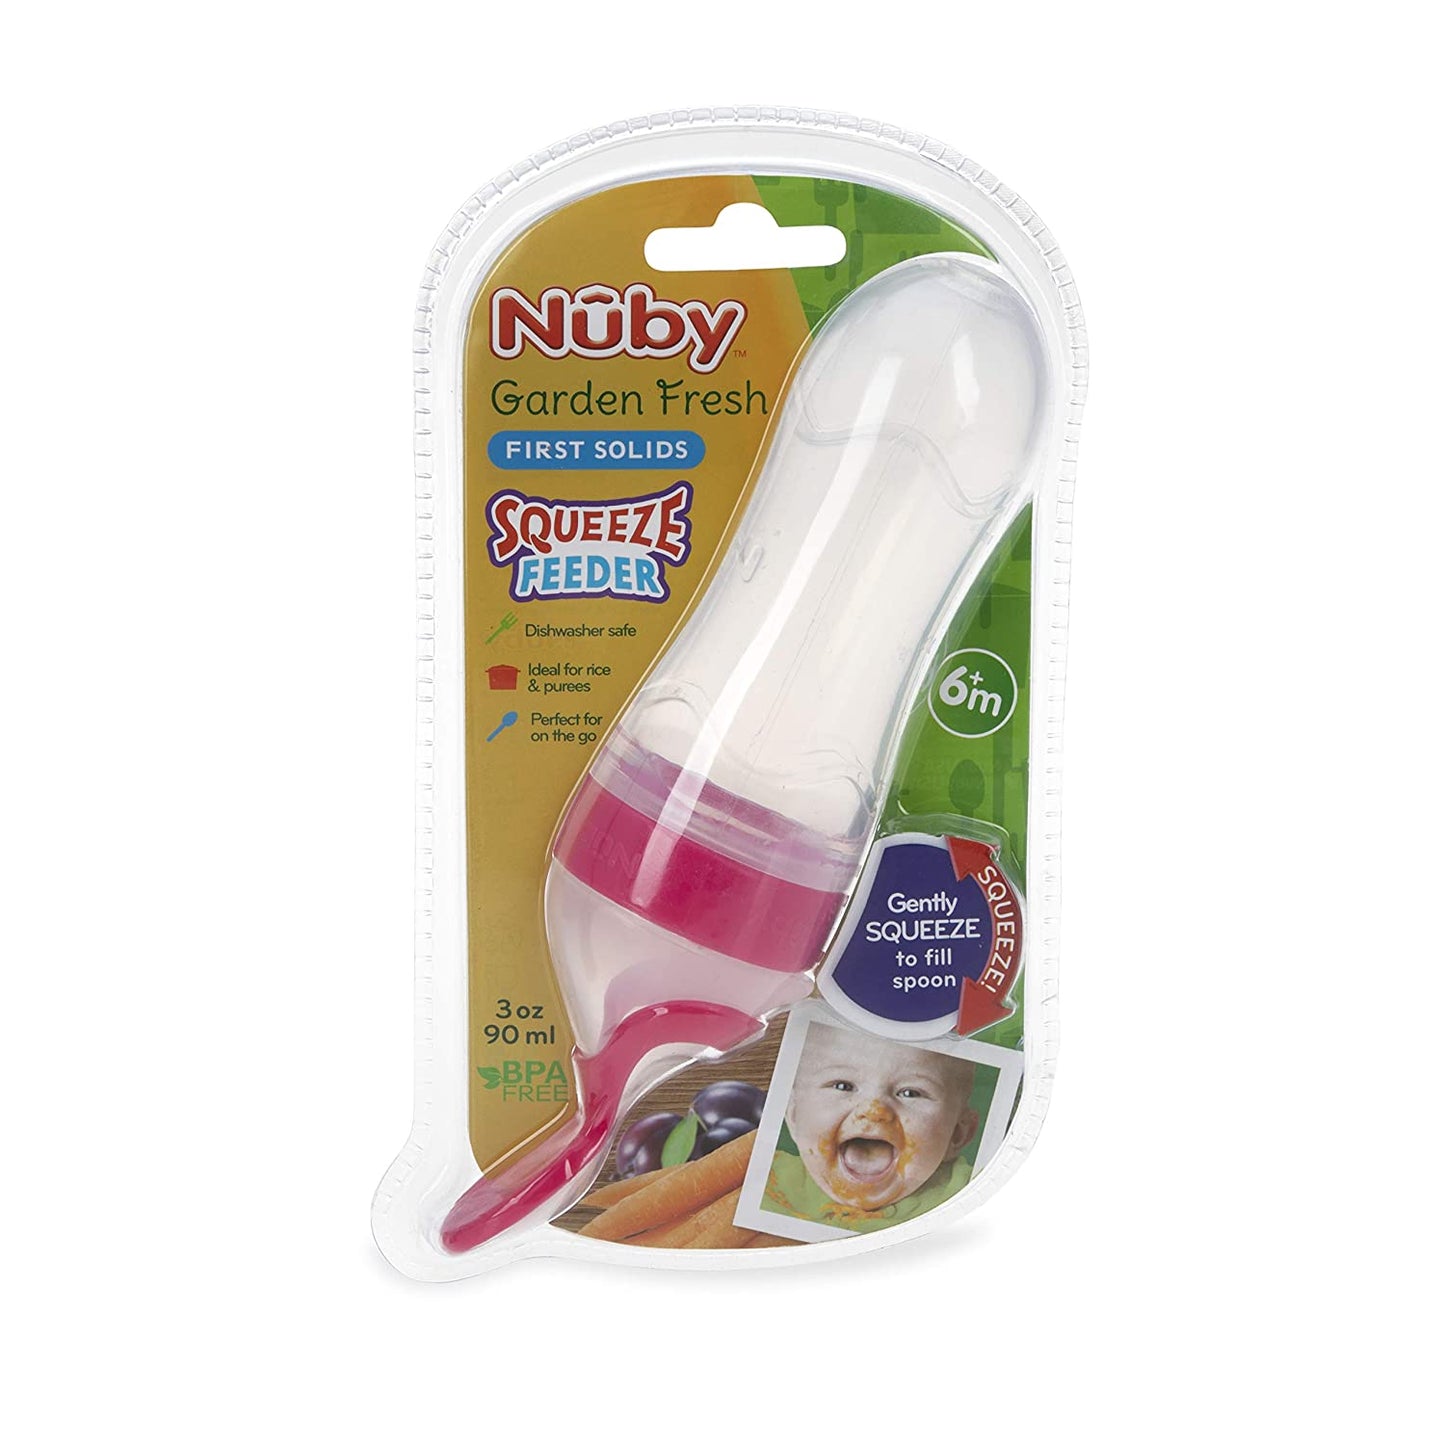 Nuby Garden Fresh Silicone Squeeze Feeder with Spoon and Hygienic Cover, Colors May Vary